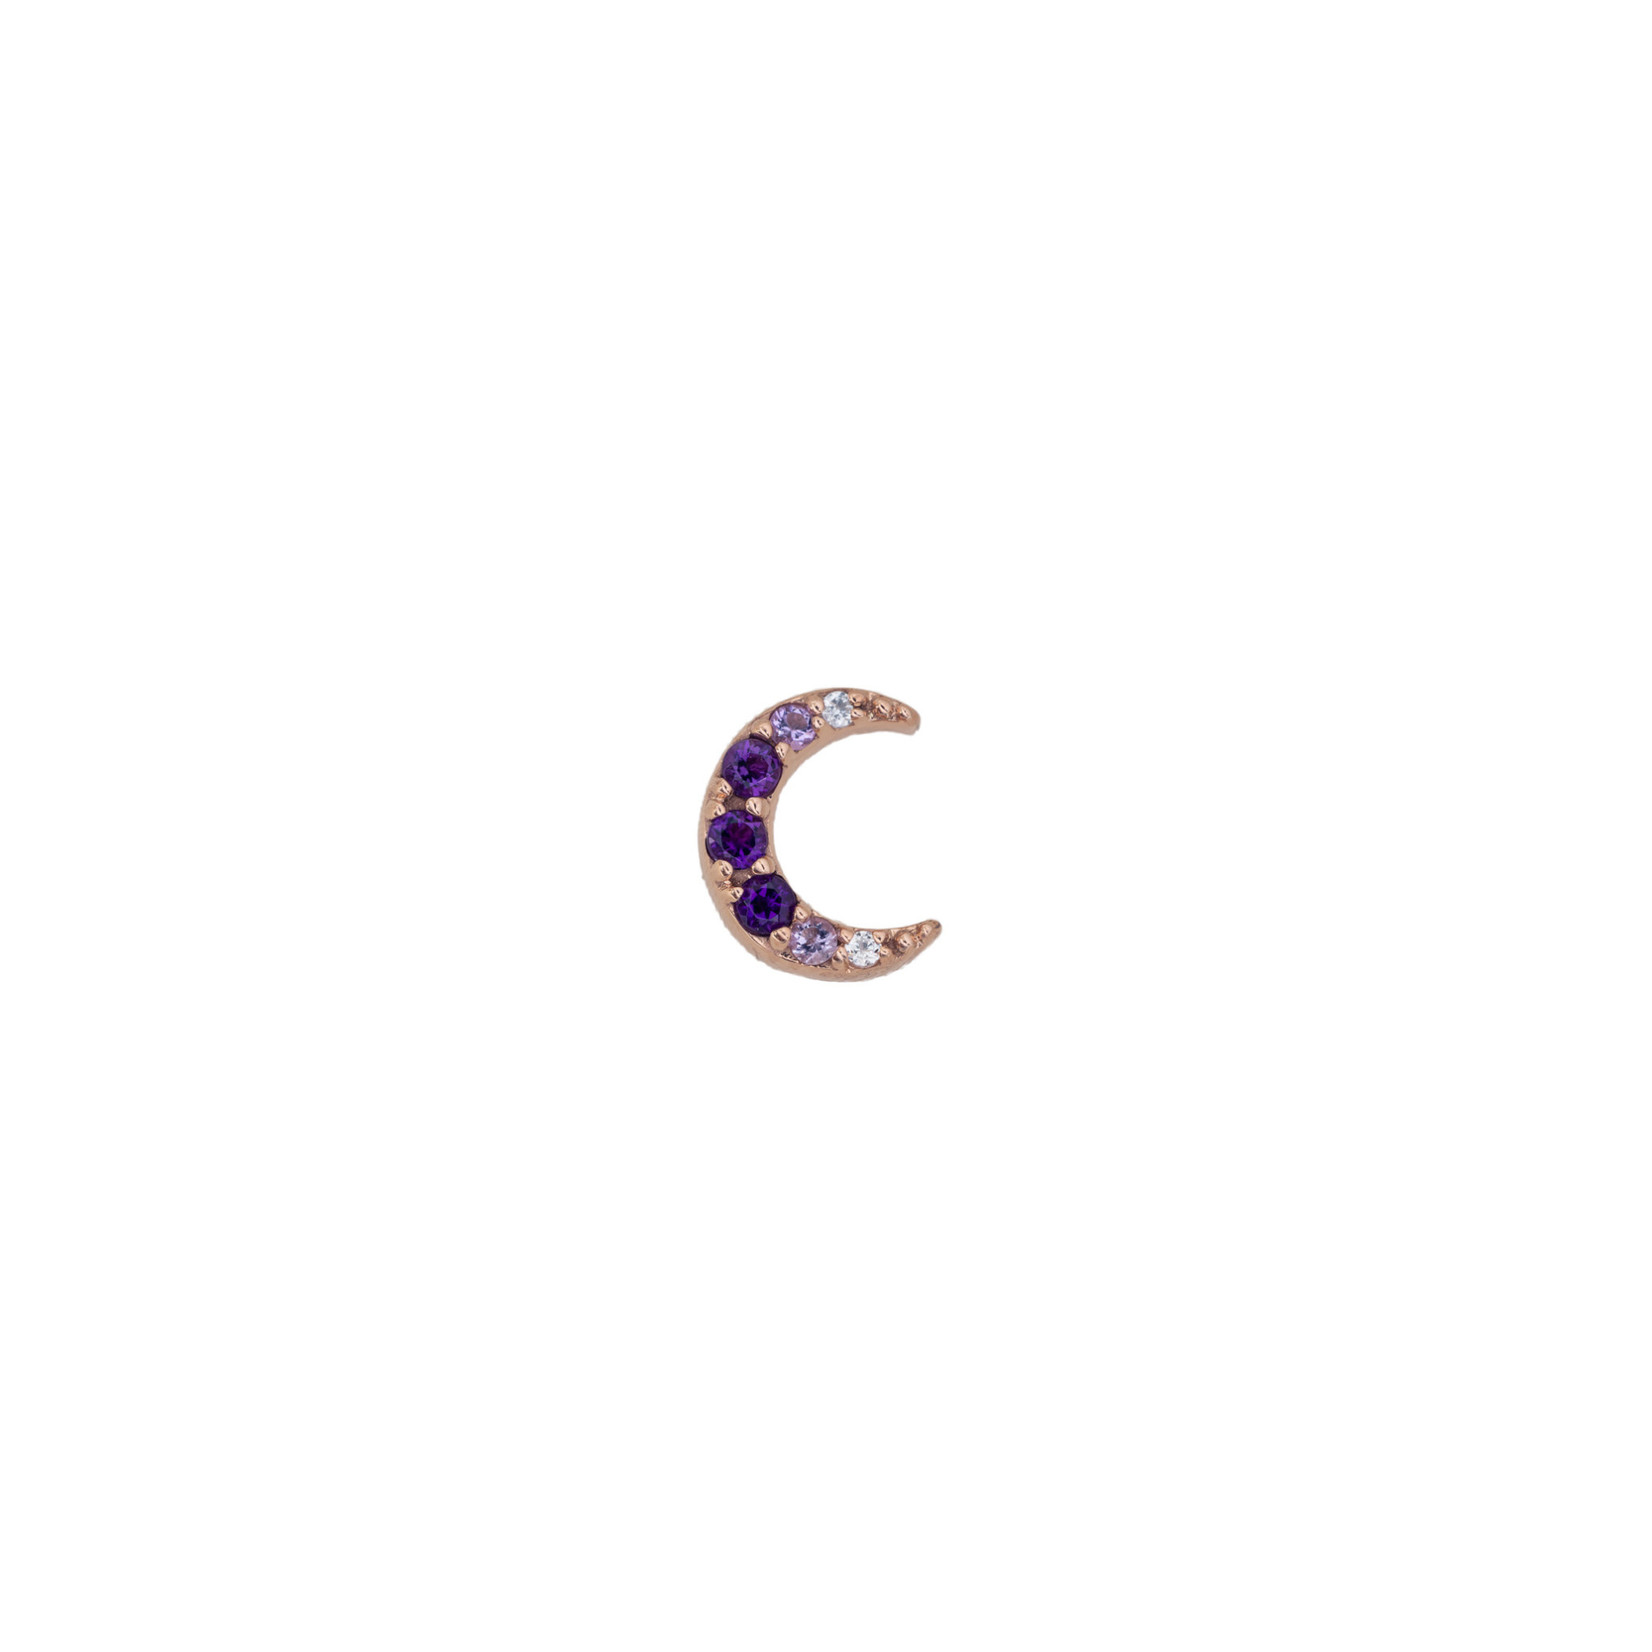 BVLA BVLA rose gold "Jula"  micro pave moon threaded end with 3x 1.25 AA amethyst , 2x 1.0 AA light amethyst, and 2x .08 CZ